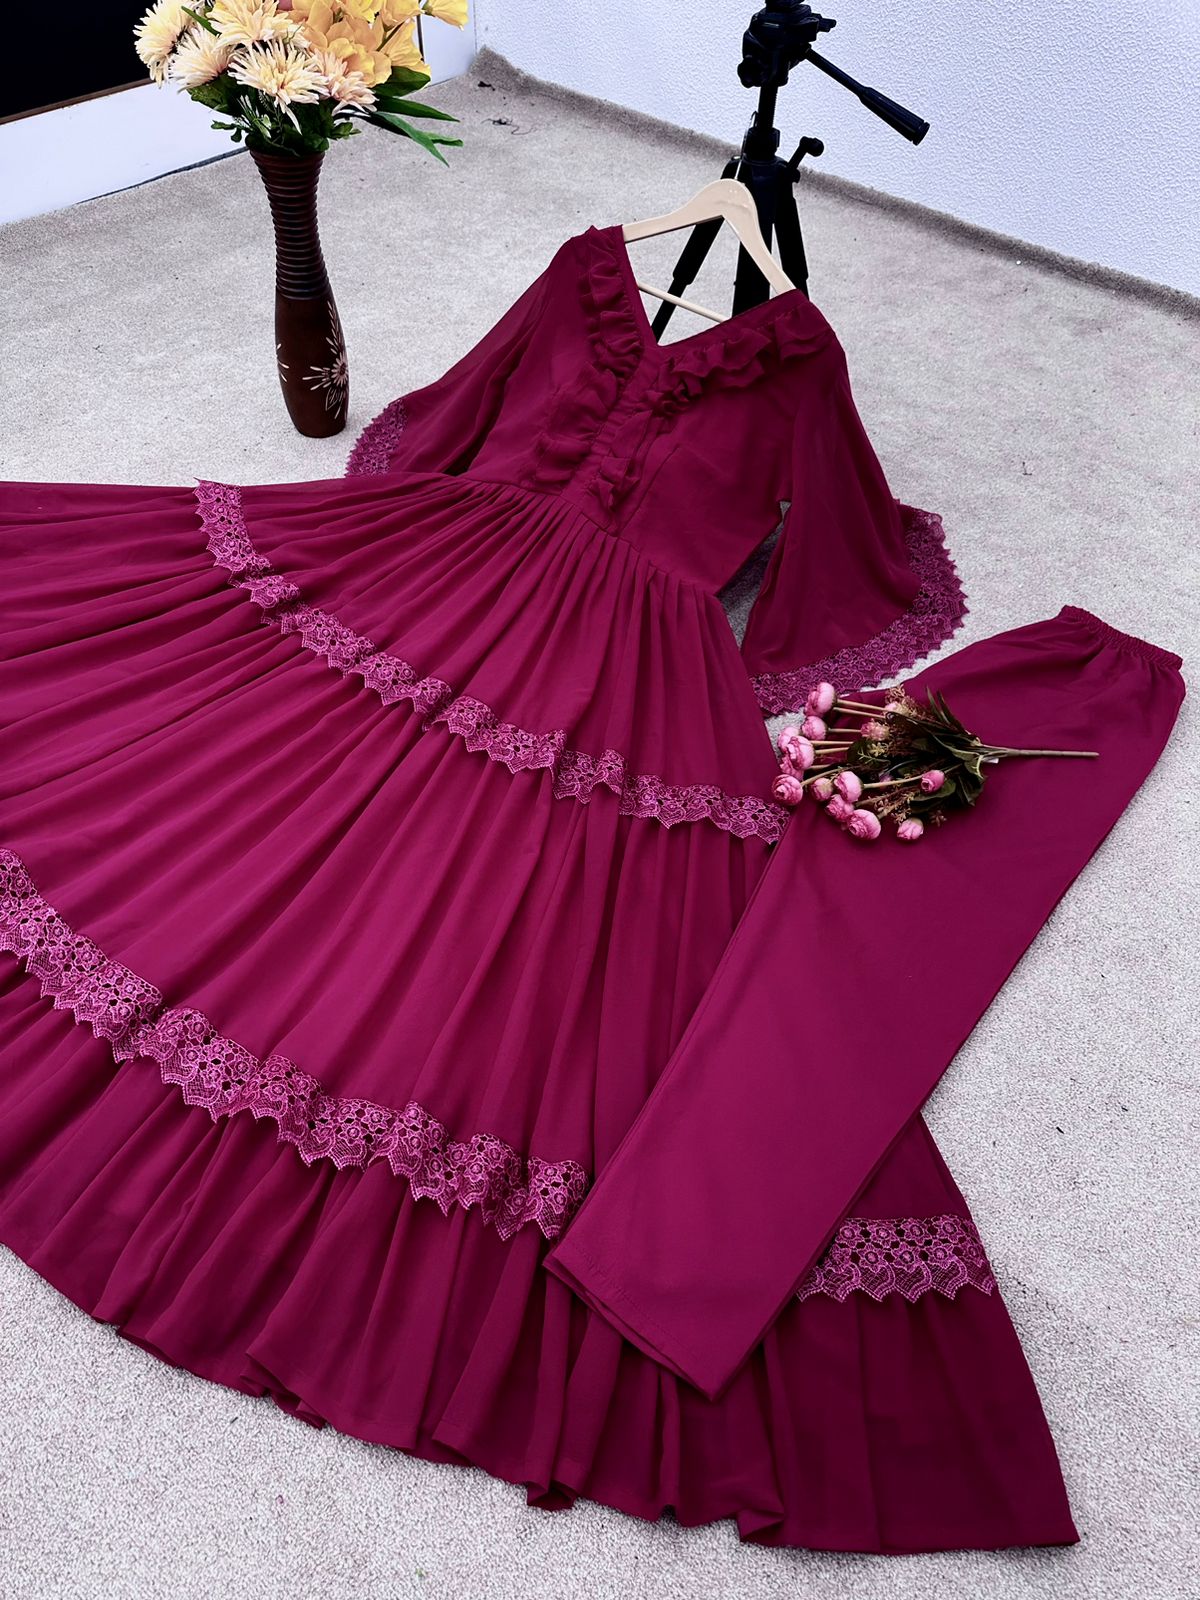 Awesome Wine Color Fancy Sleeve Gown